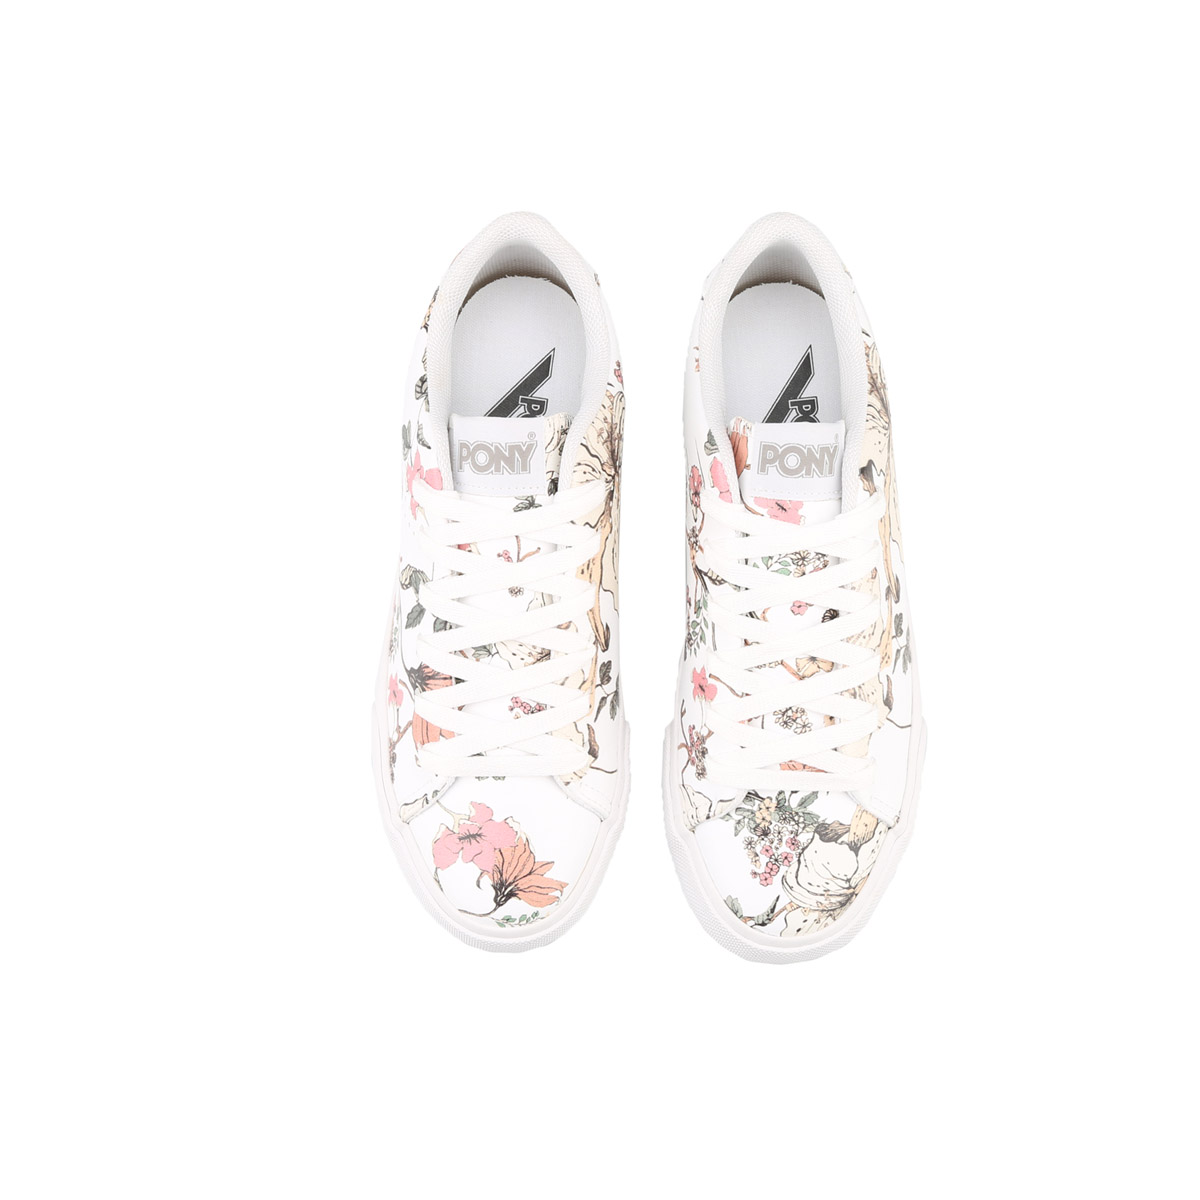 Zapatillas Pony Topstar Clean Ox Flowers,  image number null